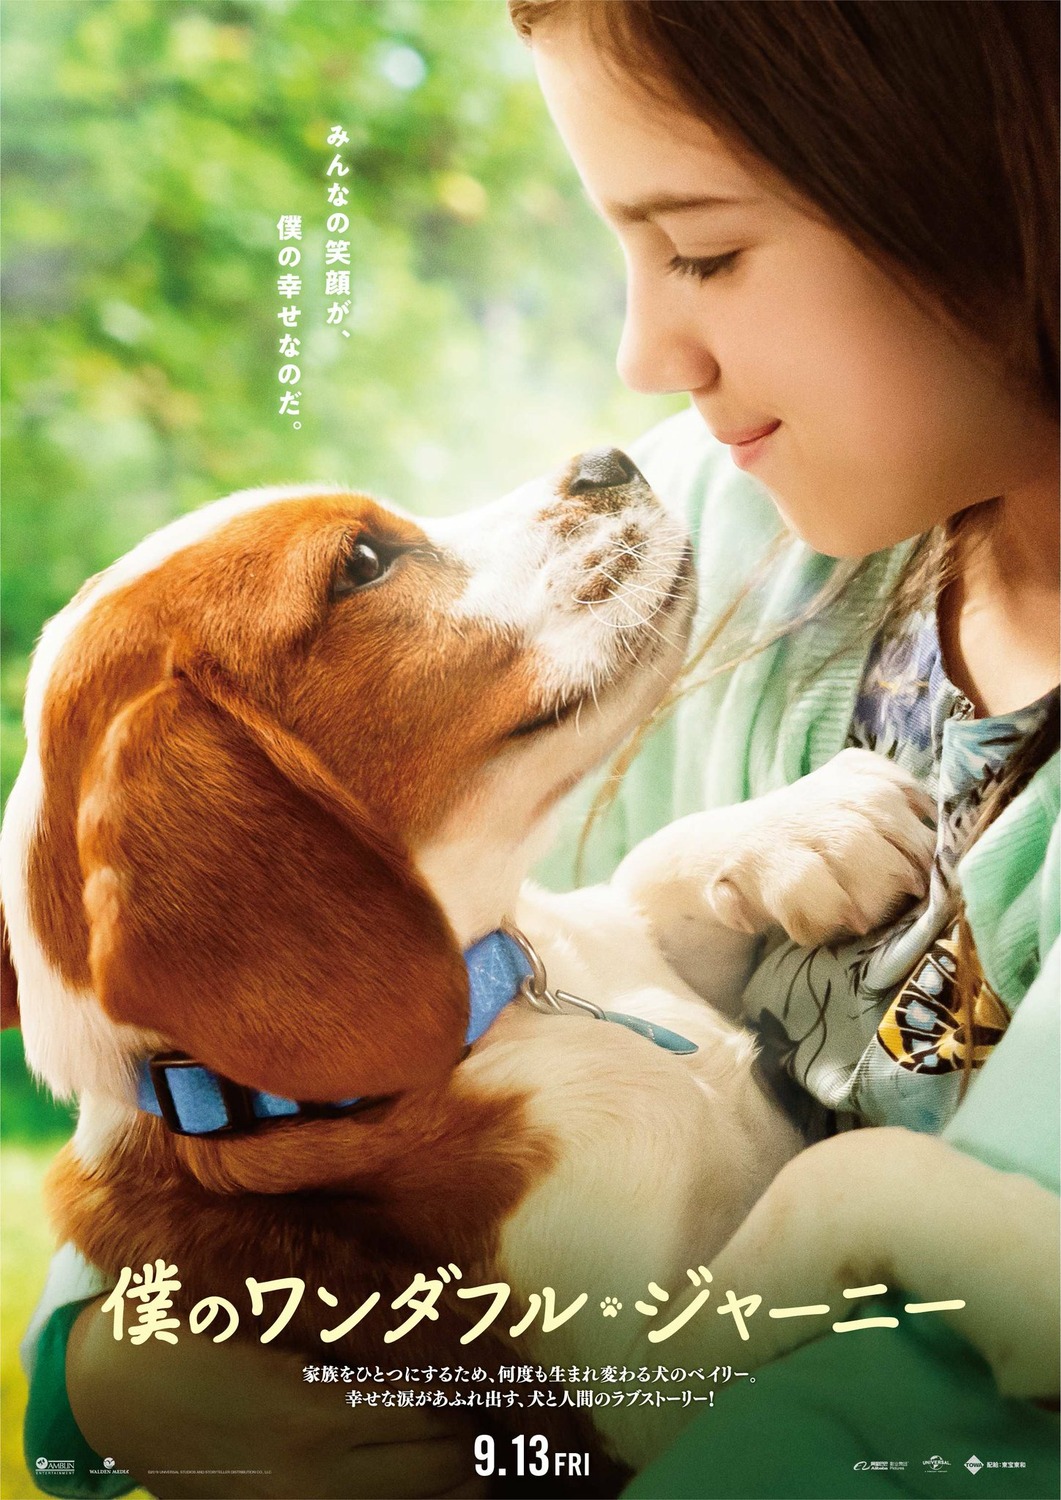 Extra Large Movie Poster Image for A Dog's Journey (#11 of 11)